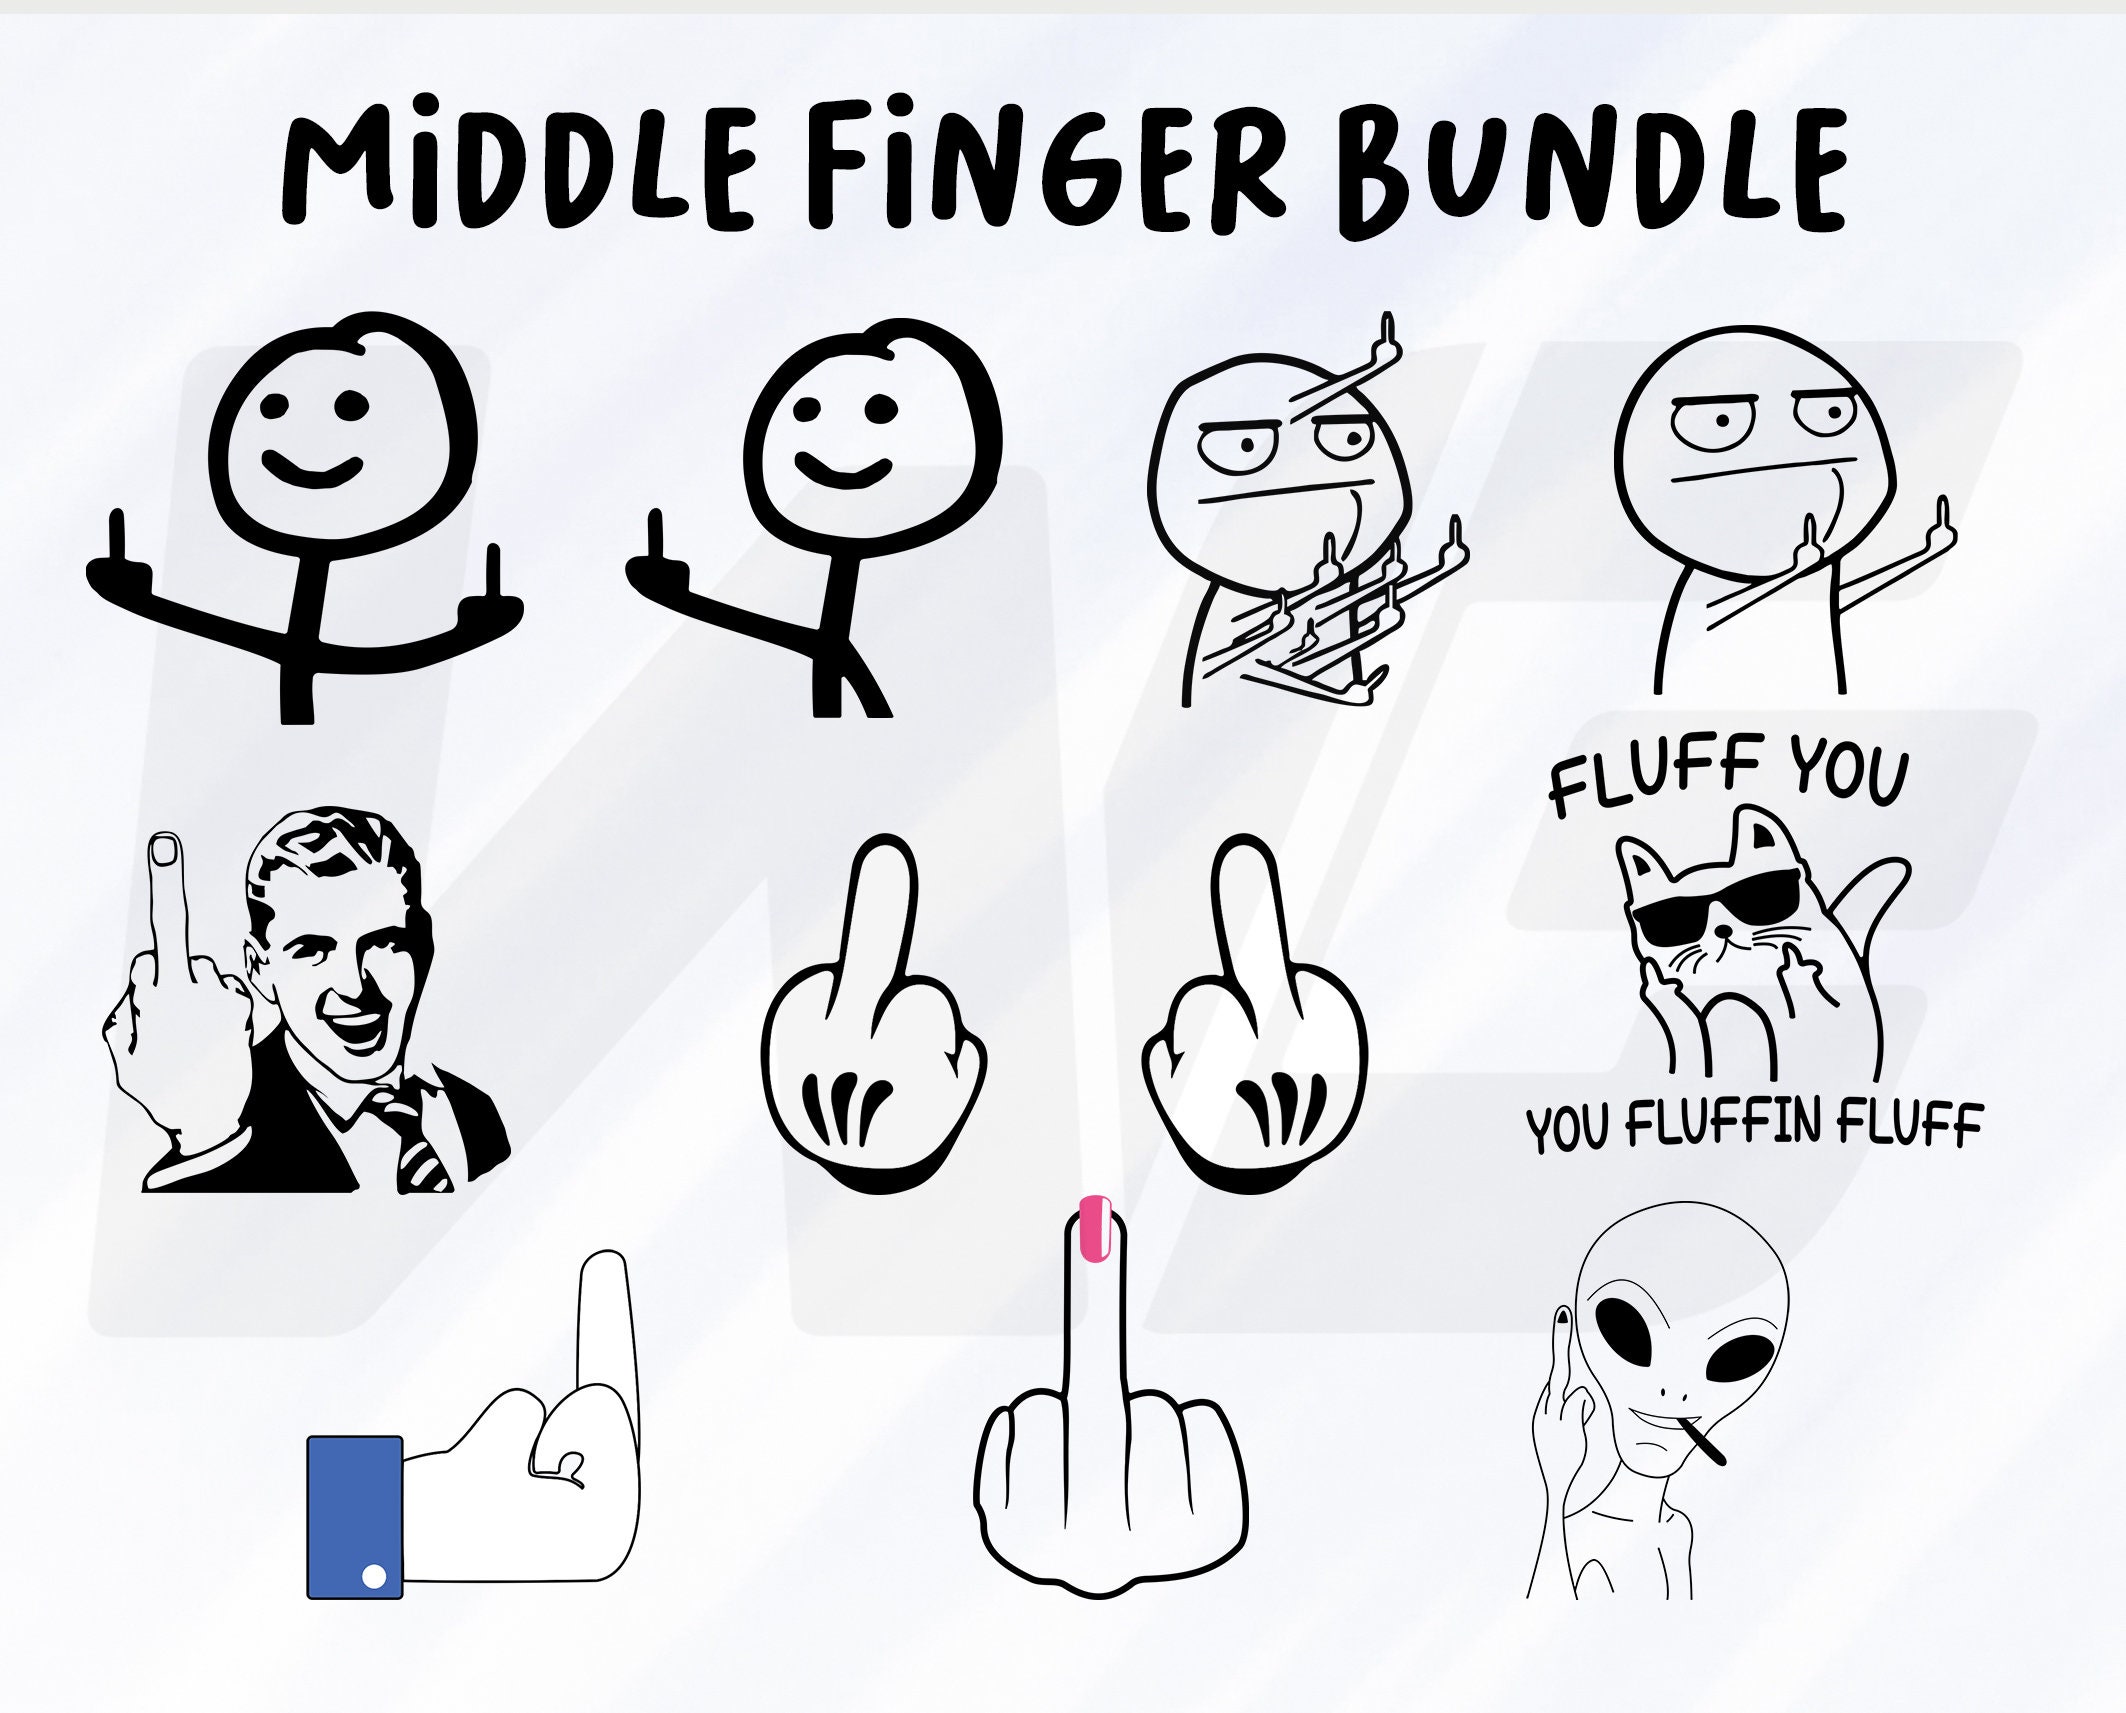 MIDDLE FINGER FLIP OFF MEME DECAL FUNNY ANGRY STICK MAN STICKER